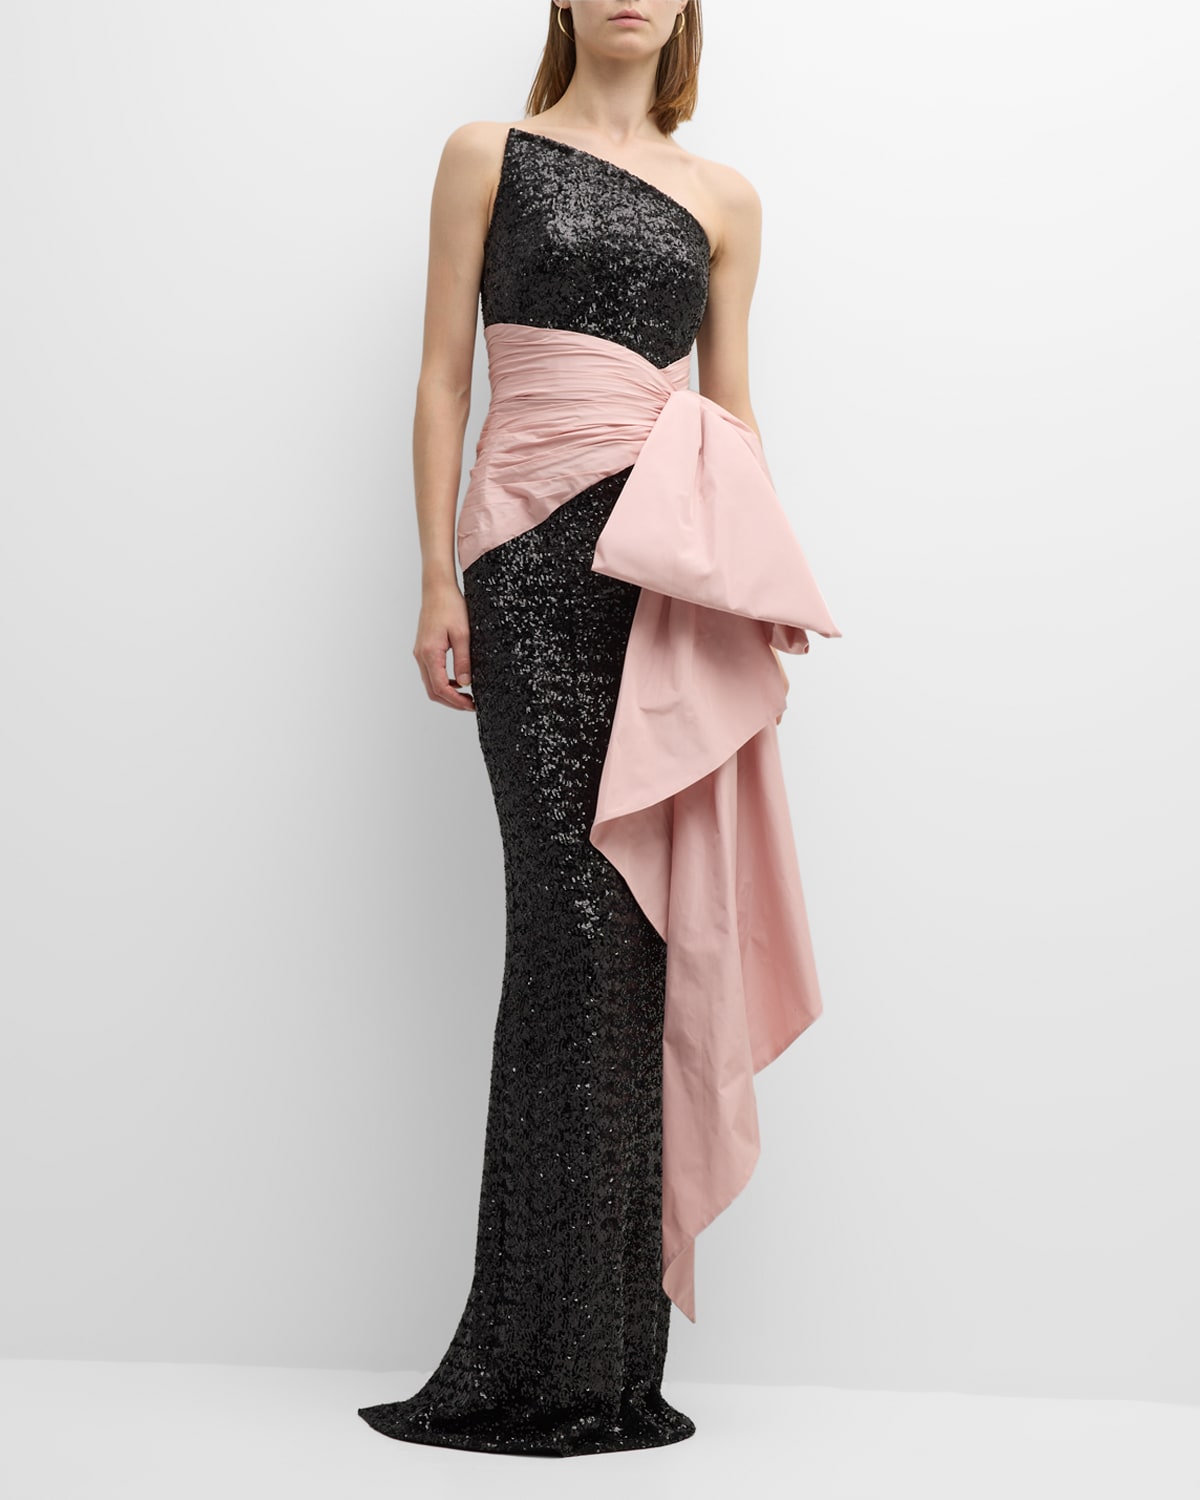 Pamella Roland Strapless Stretch Sequin Gown With Taffeta Bow Sash In Black Blush